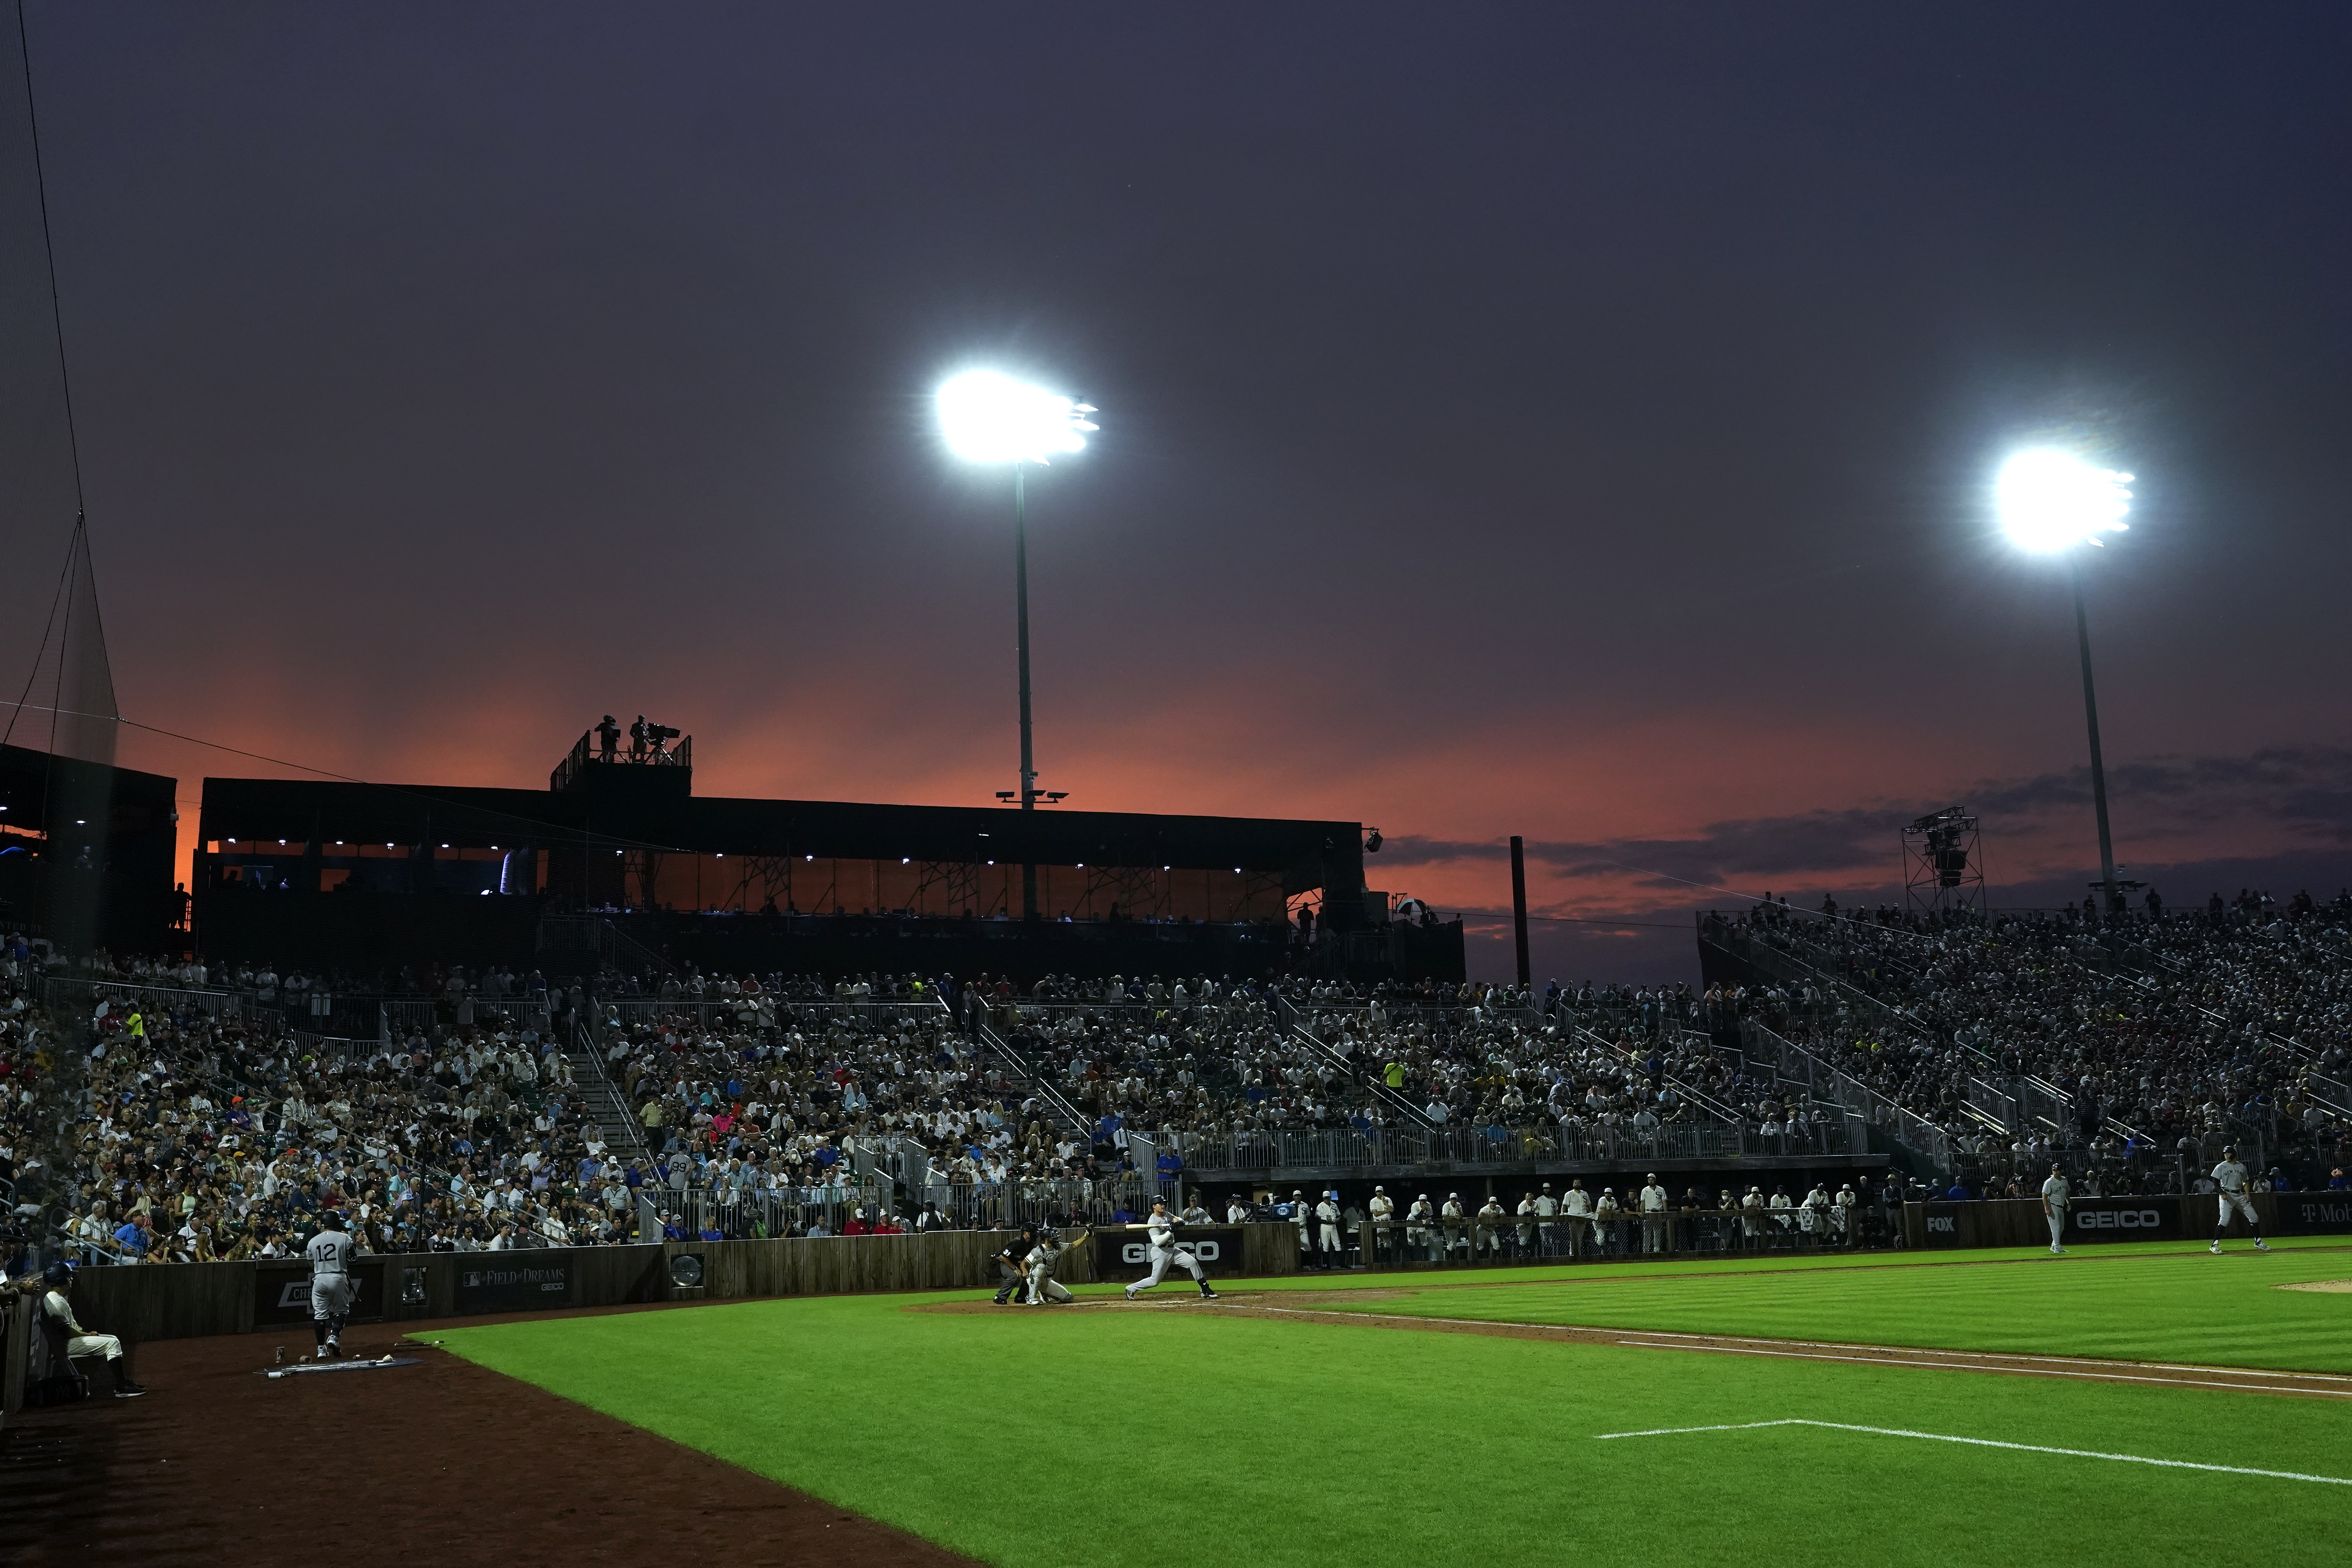 Field of Dreams Game 2021 8 x 10 Baseball Stadium Photo - Chicago White  Sox v. New York Yankees at 's Sports Collectibles Store